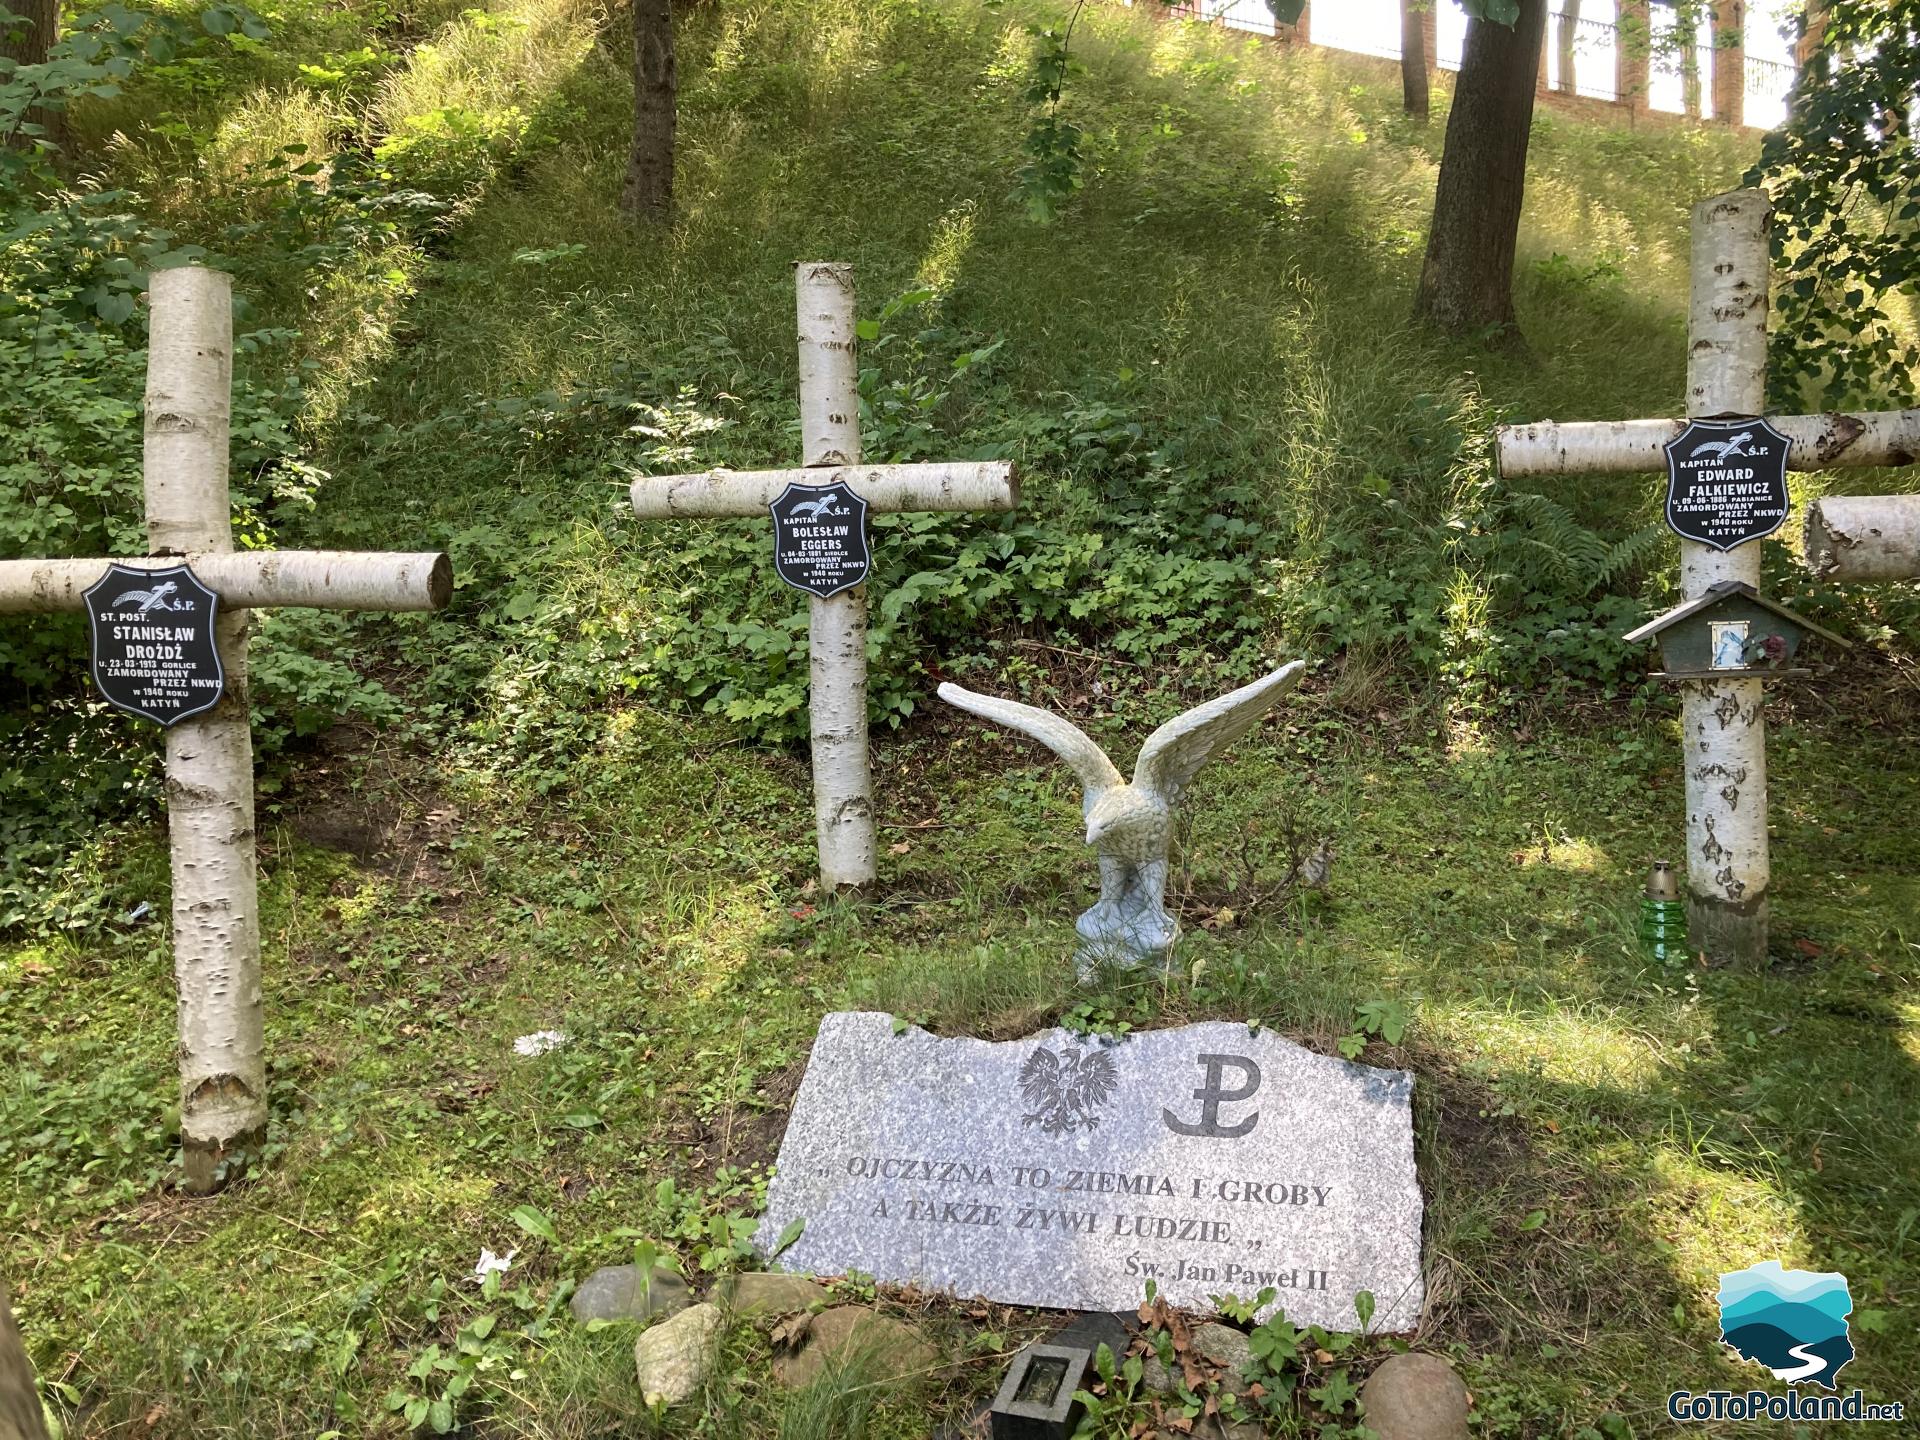 crosses made of birch wood commemorating Polish soldiers murdered in Katyn